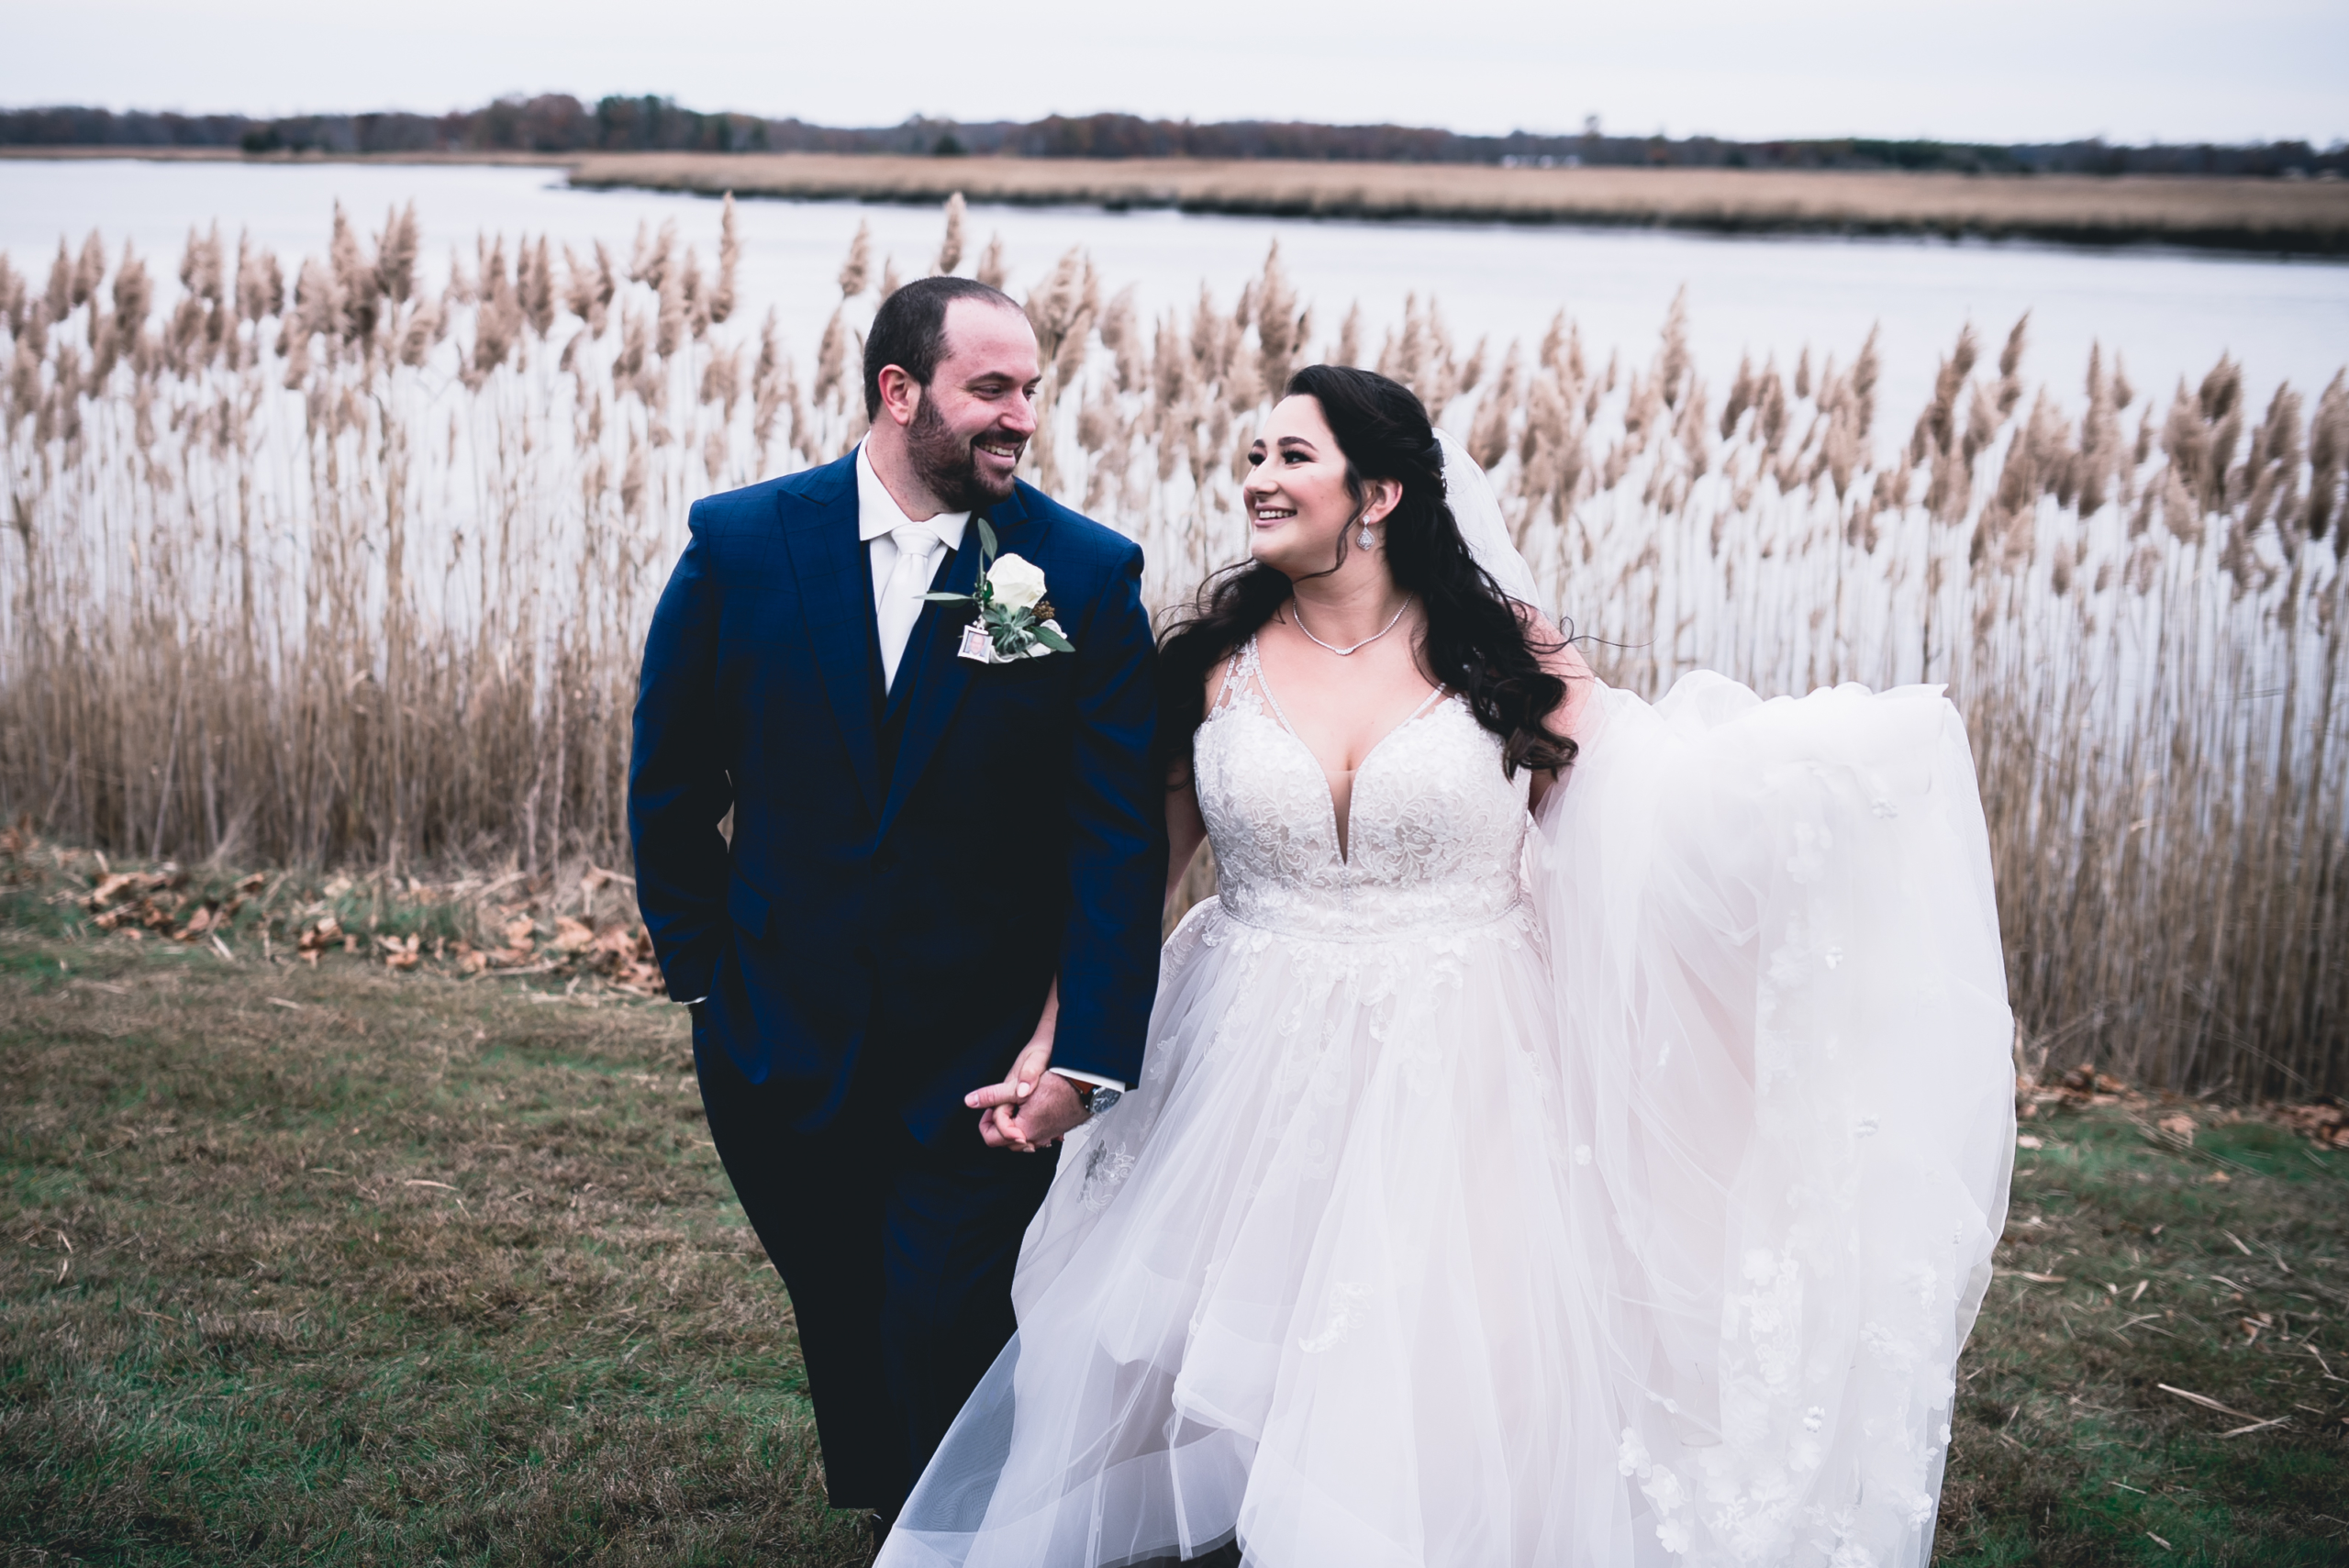 the best of NJ wedding videography